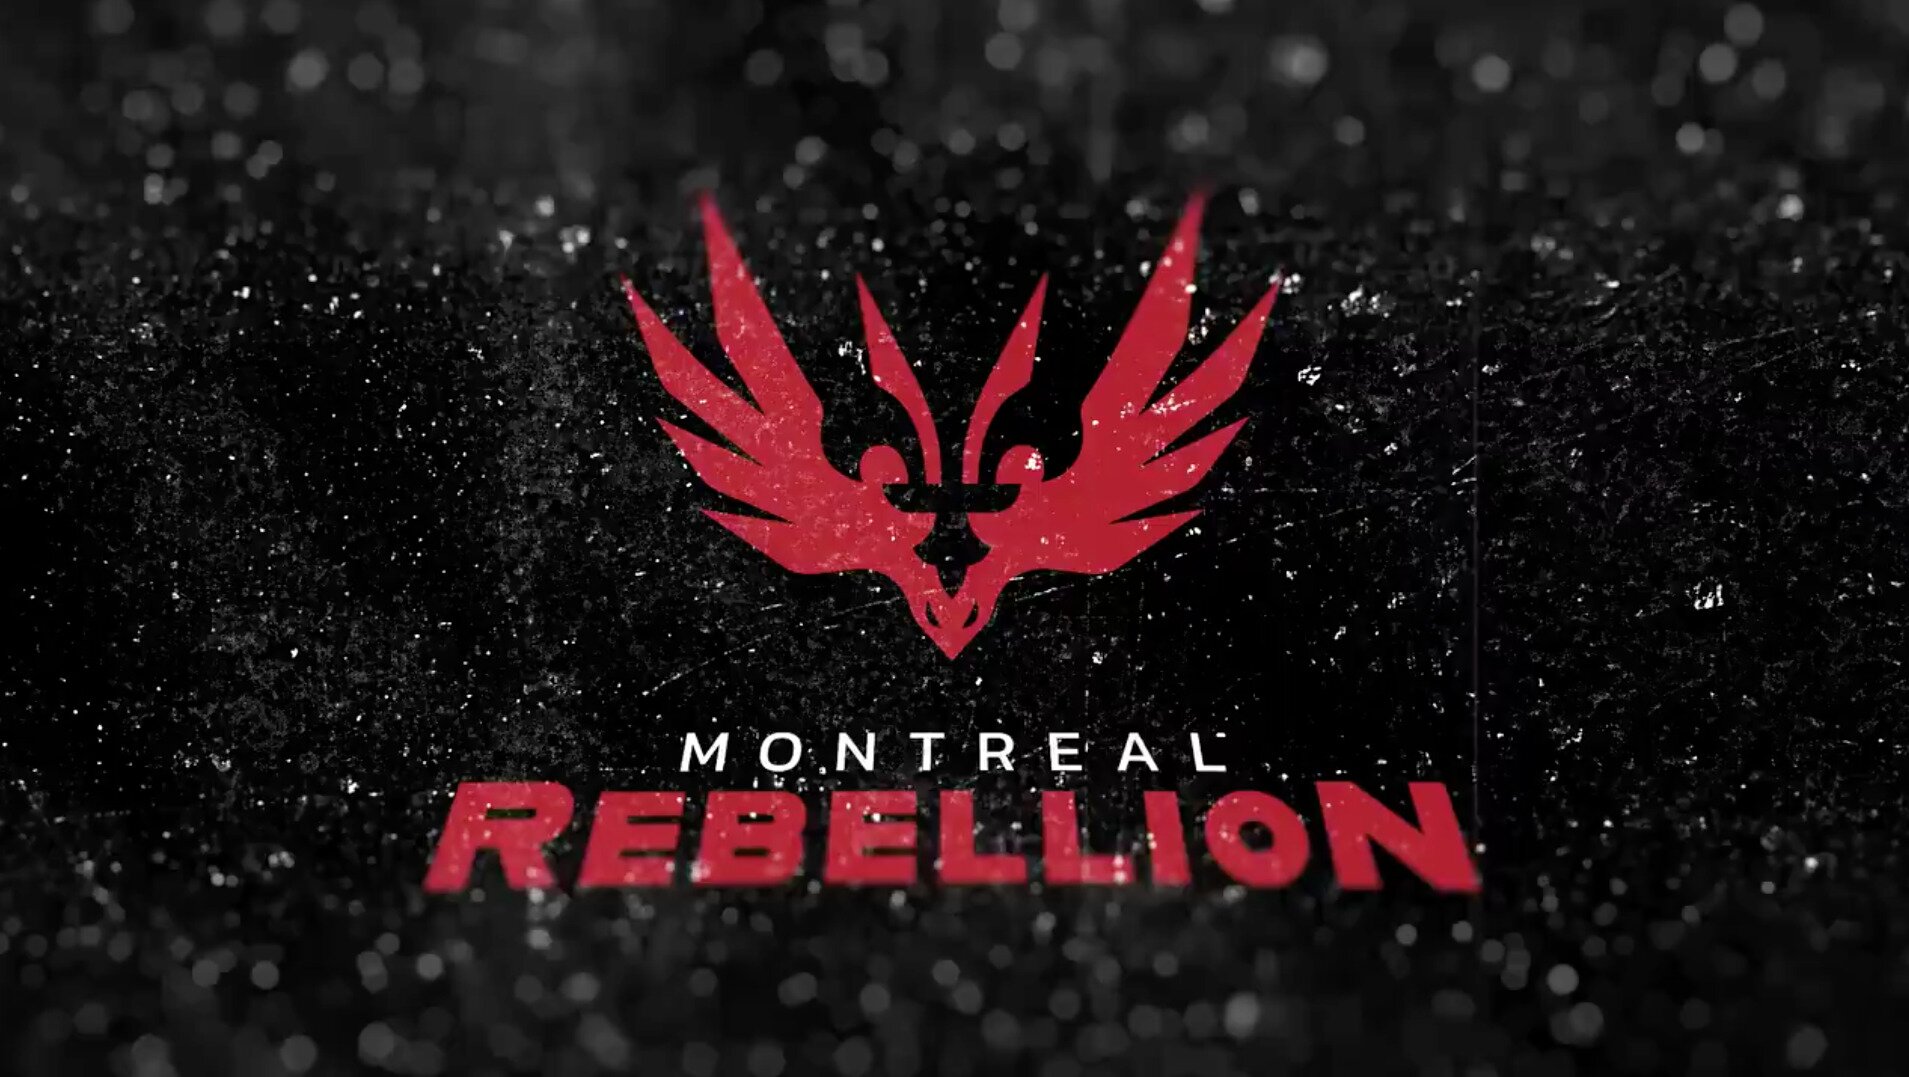 With a logo that proudly incorporates a bird, the fleur-de-lis and an “m”, the Montreal Rebellion are set to be a big contender this season.